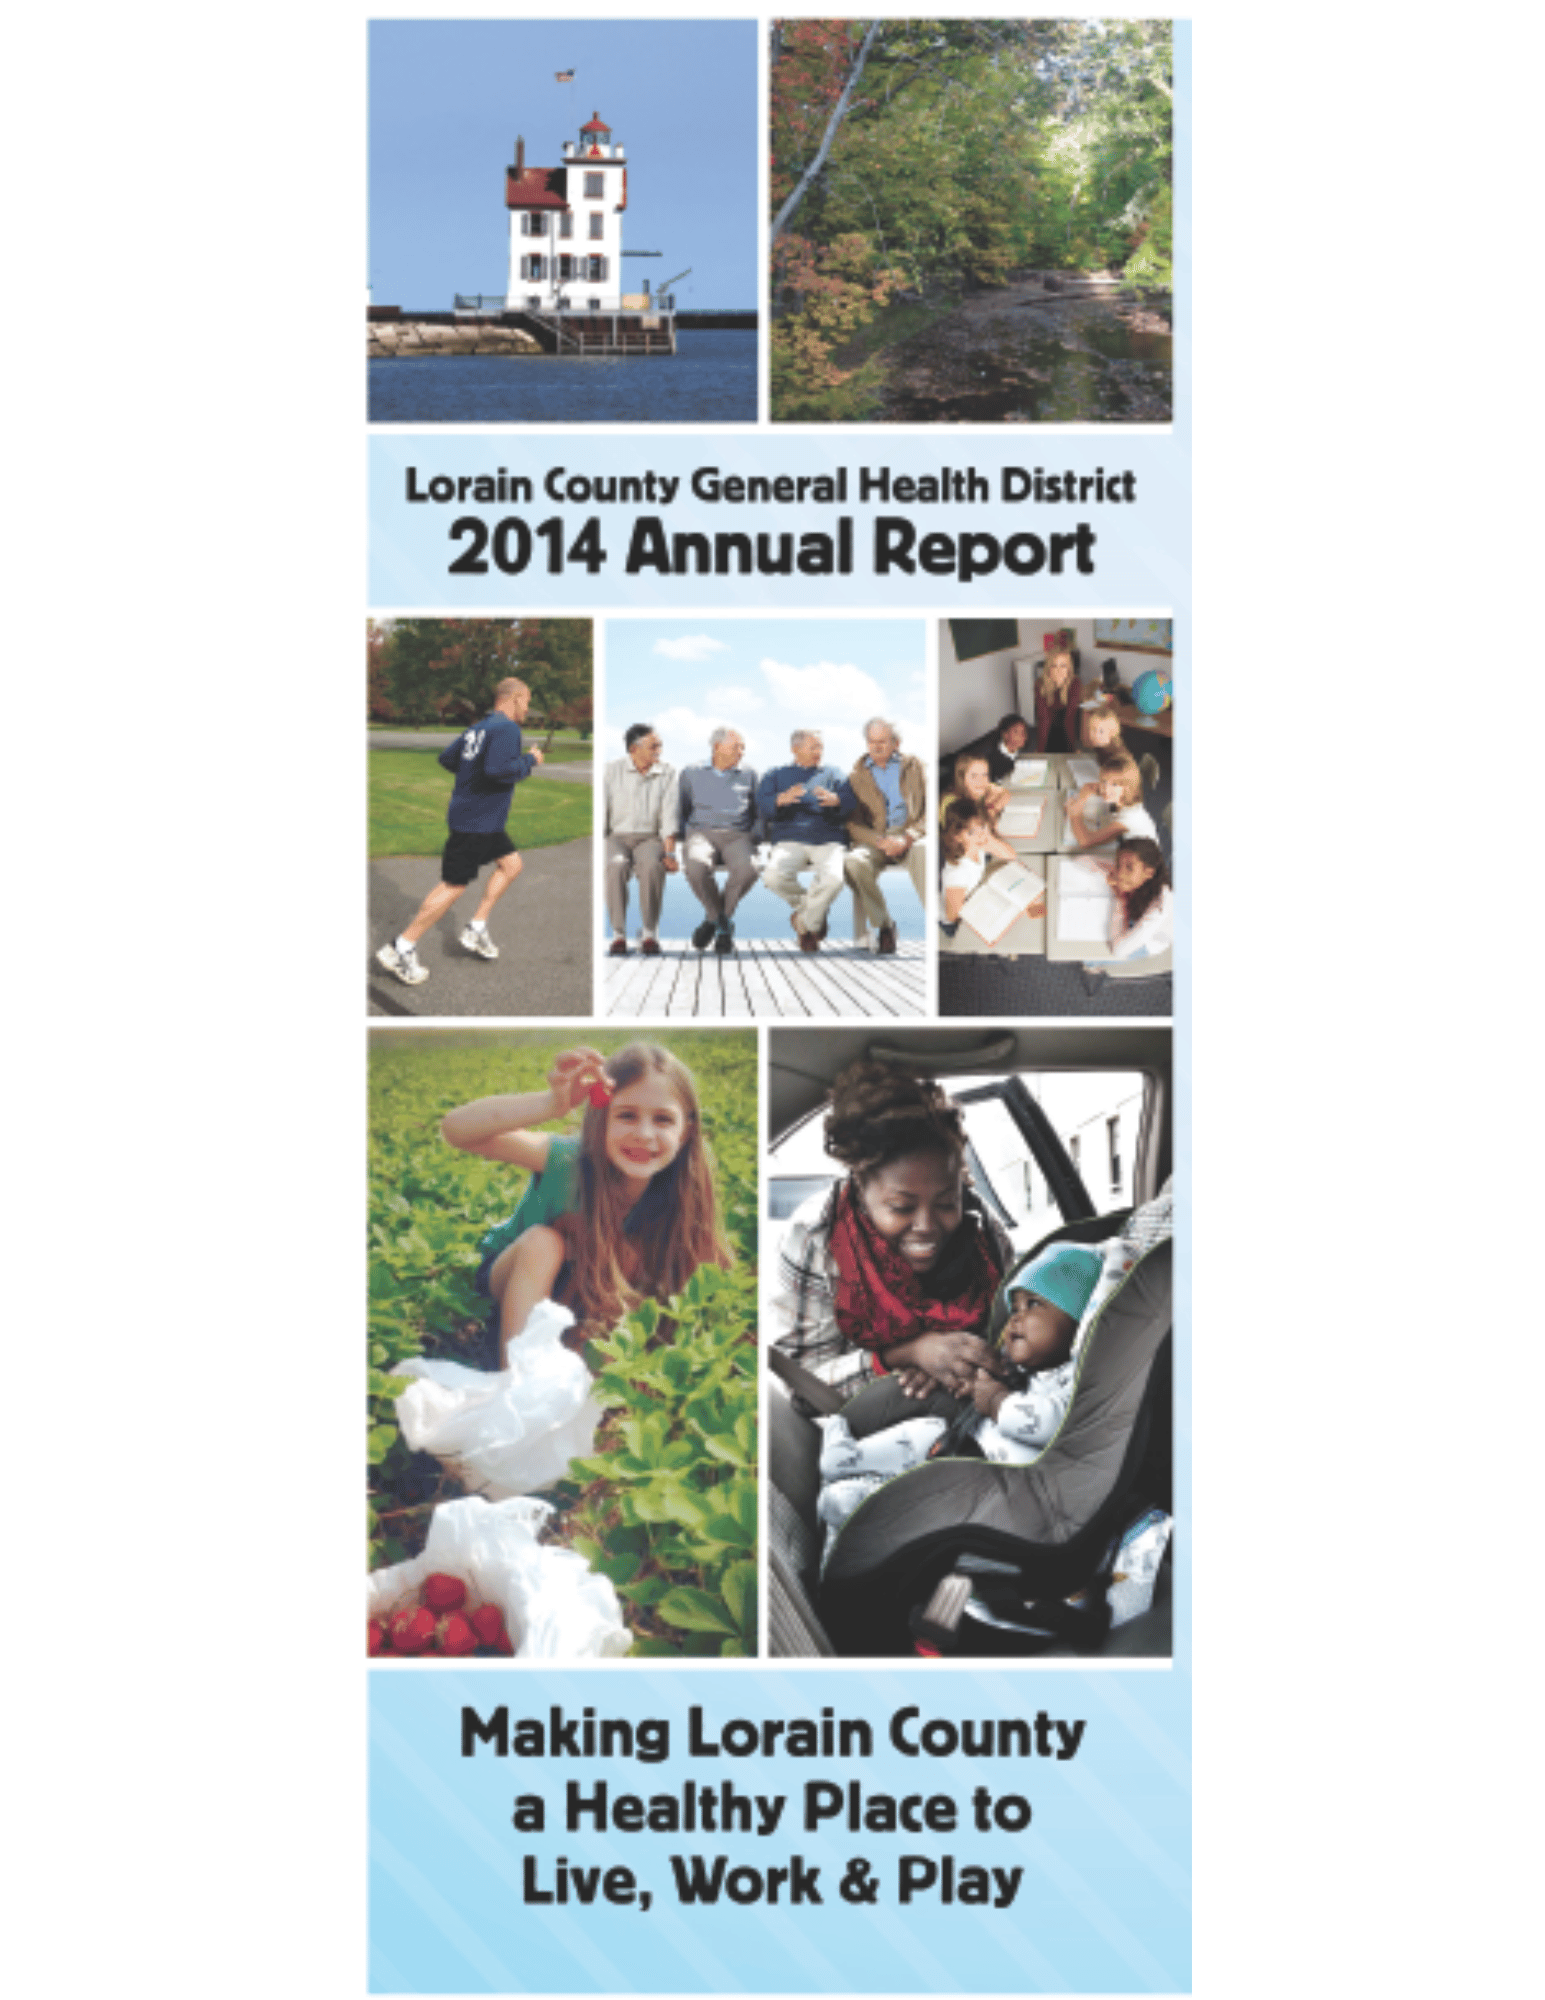 Title "Lorain County General Health District 2014 Annual Report: Making Lorain County a healthy place to live, work and play." Photos of: the Lorain Lighthouse, a woodland stream, Dave Covell on a run